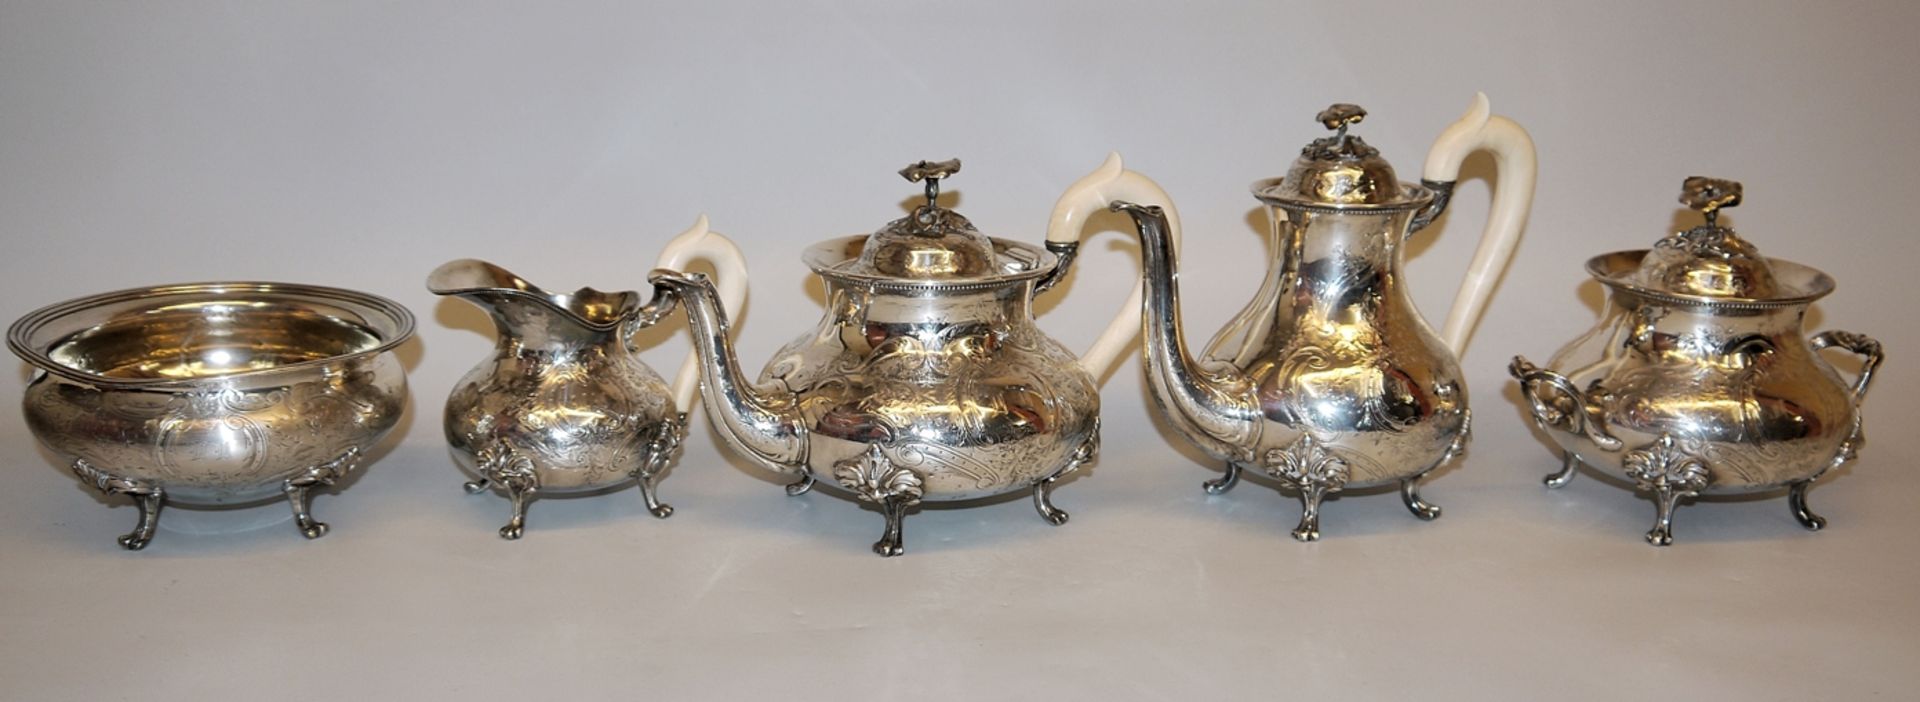 Coffee and tea centre with pastry bowl, silver-plated, Christofle, France, circa 1880/1900